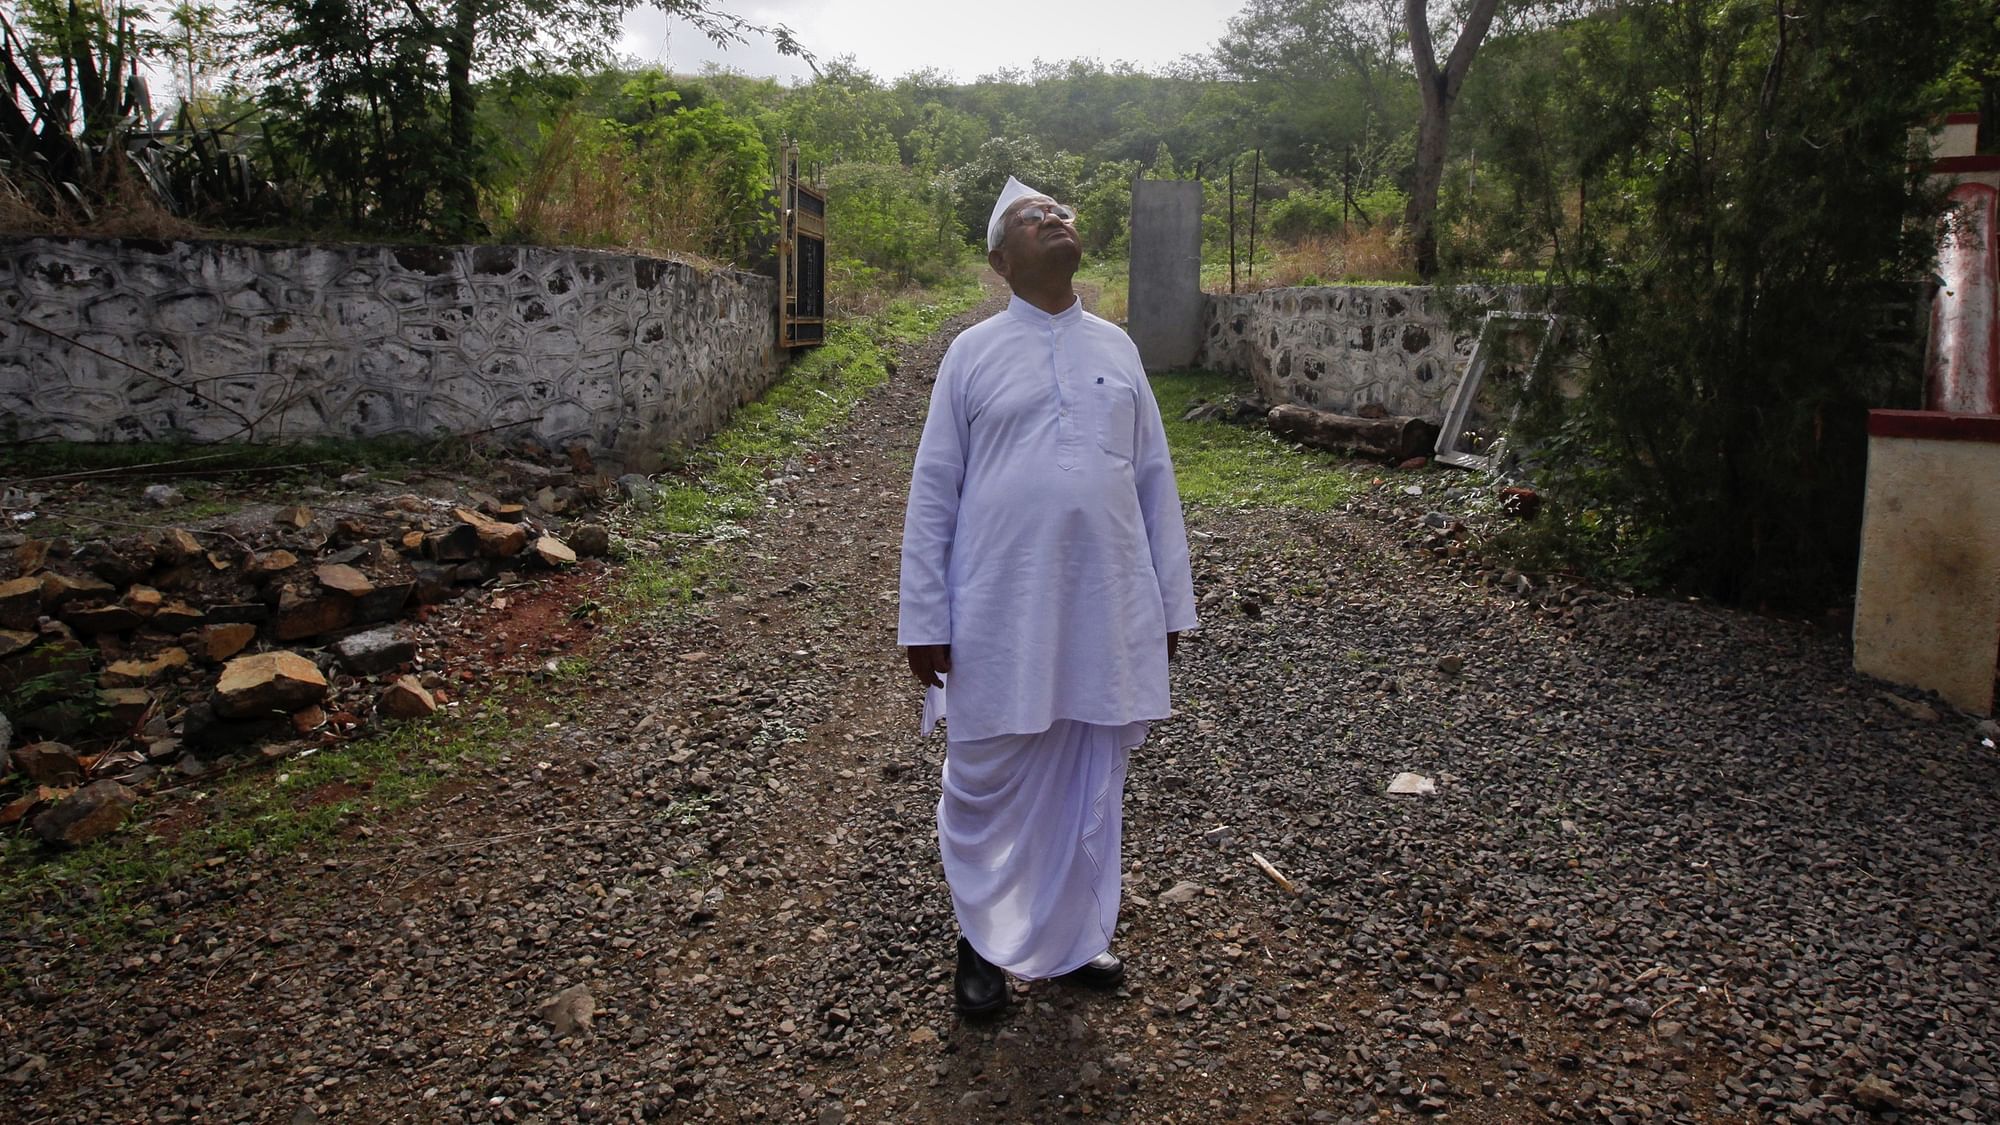 Anna Hazare inspects a school building in his village Ralegan Siddhi. (Photo: Reuters)